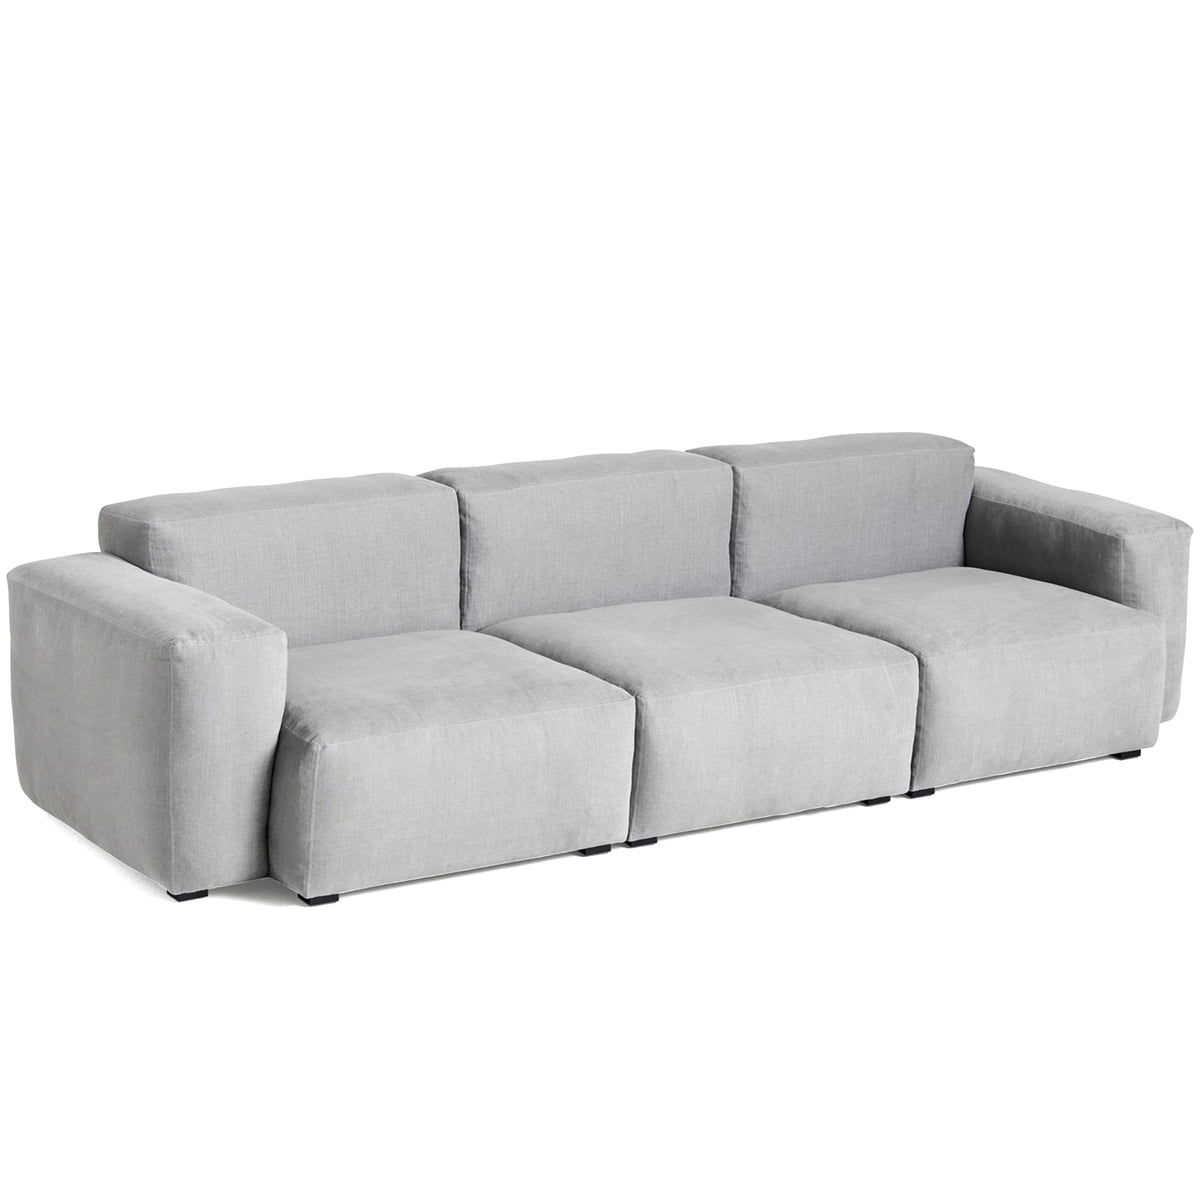 Hay - Mags Sofa 3 pers | Connox